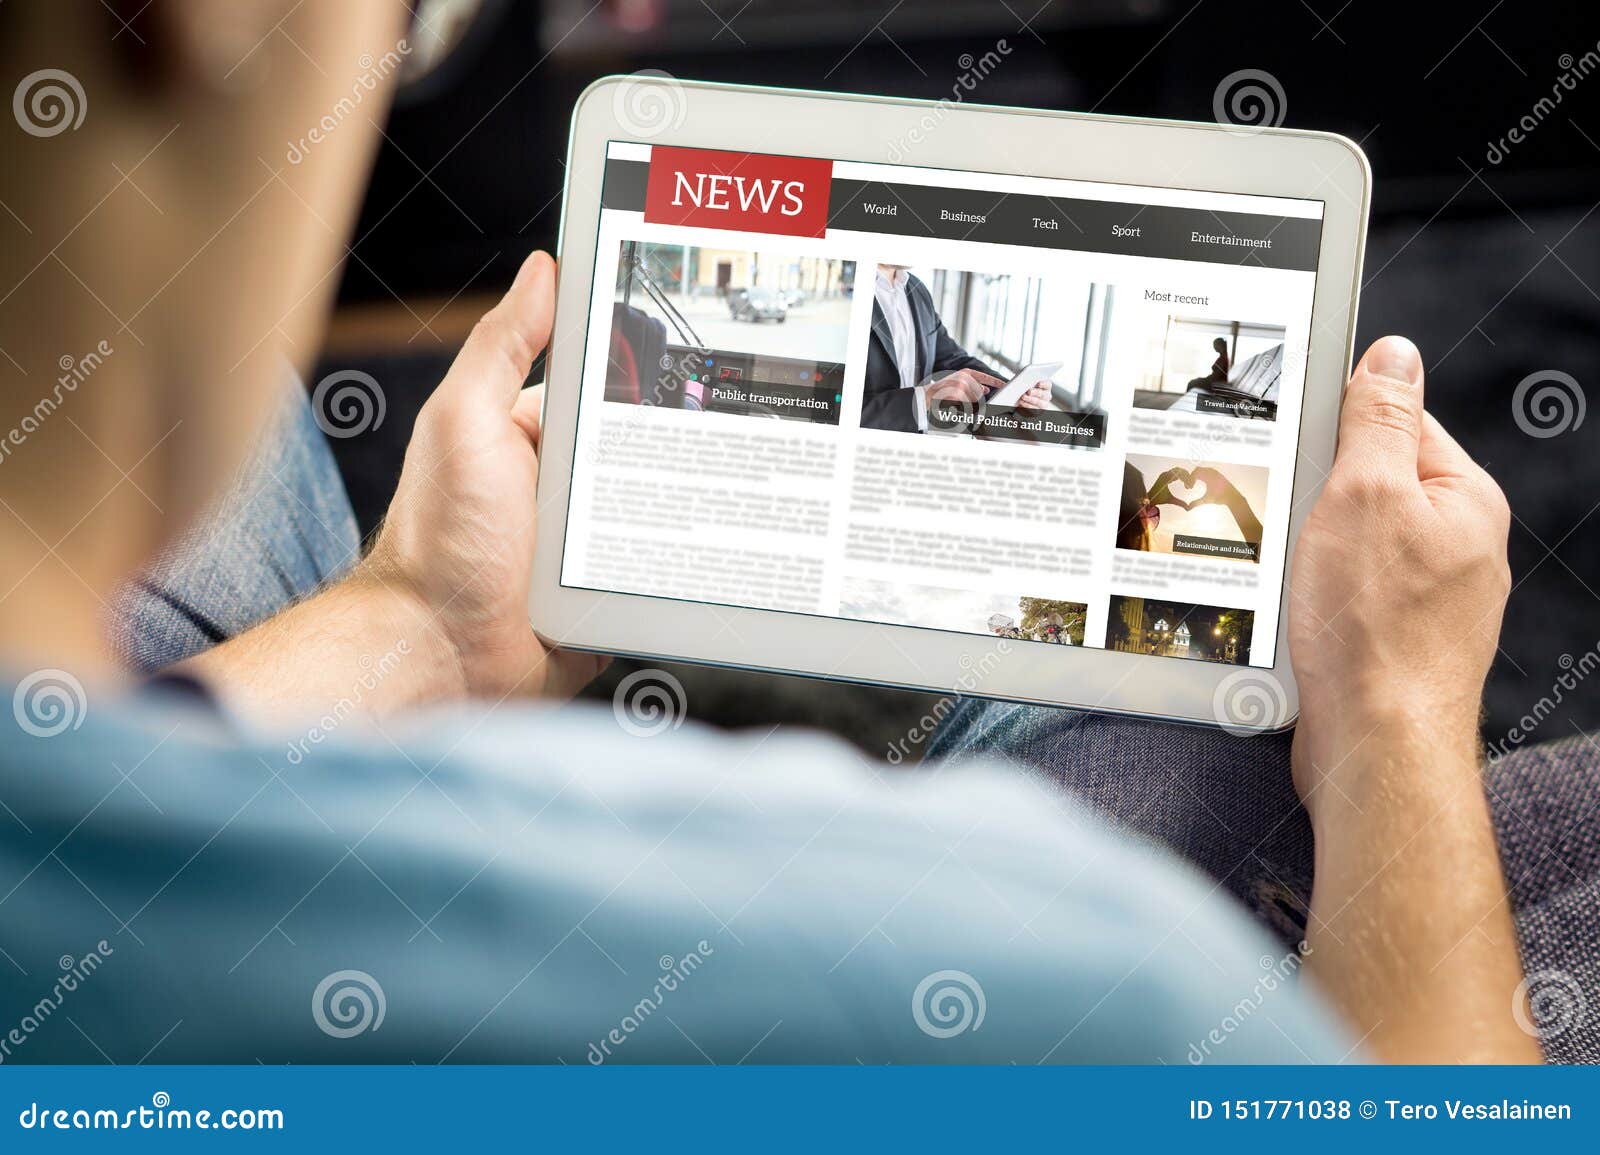 online news article on tablet screen. electronic newspaper or magazine. latest daily press and media. mockup of digital portal.